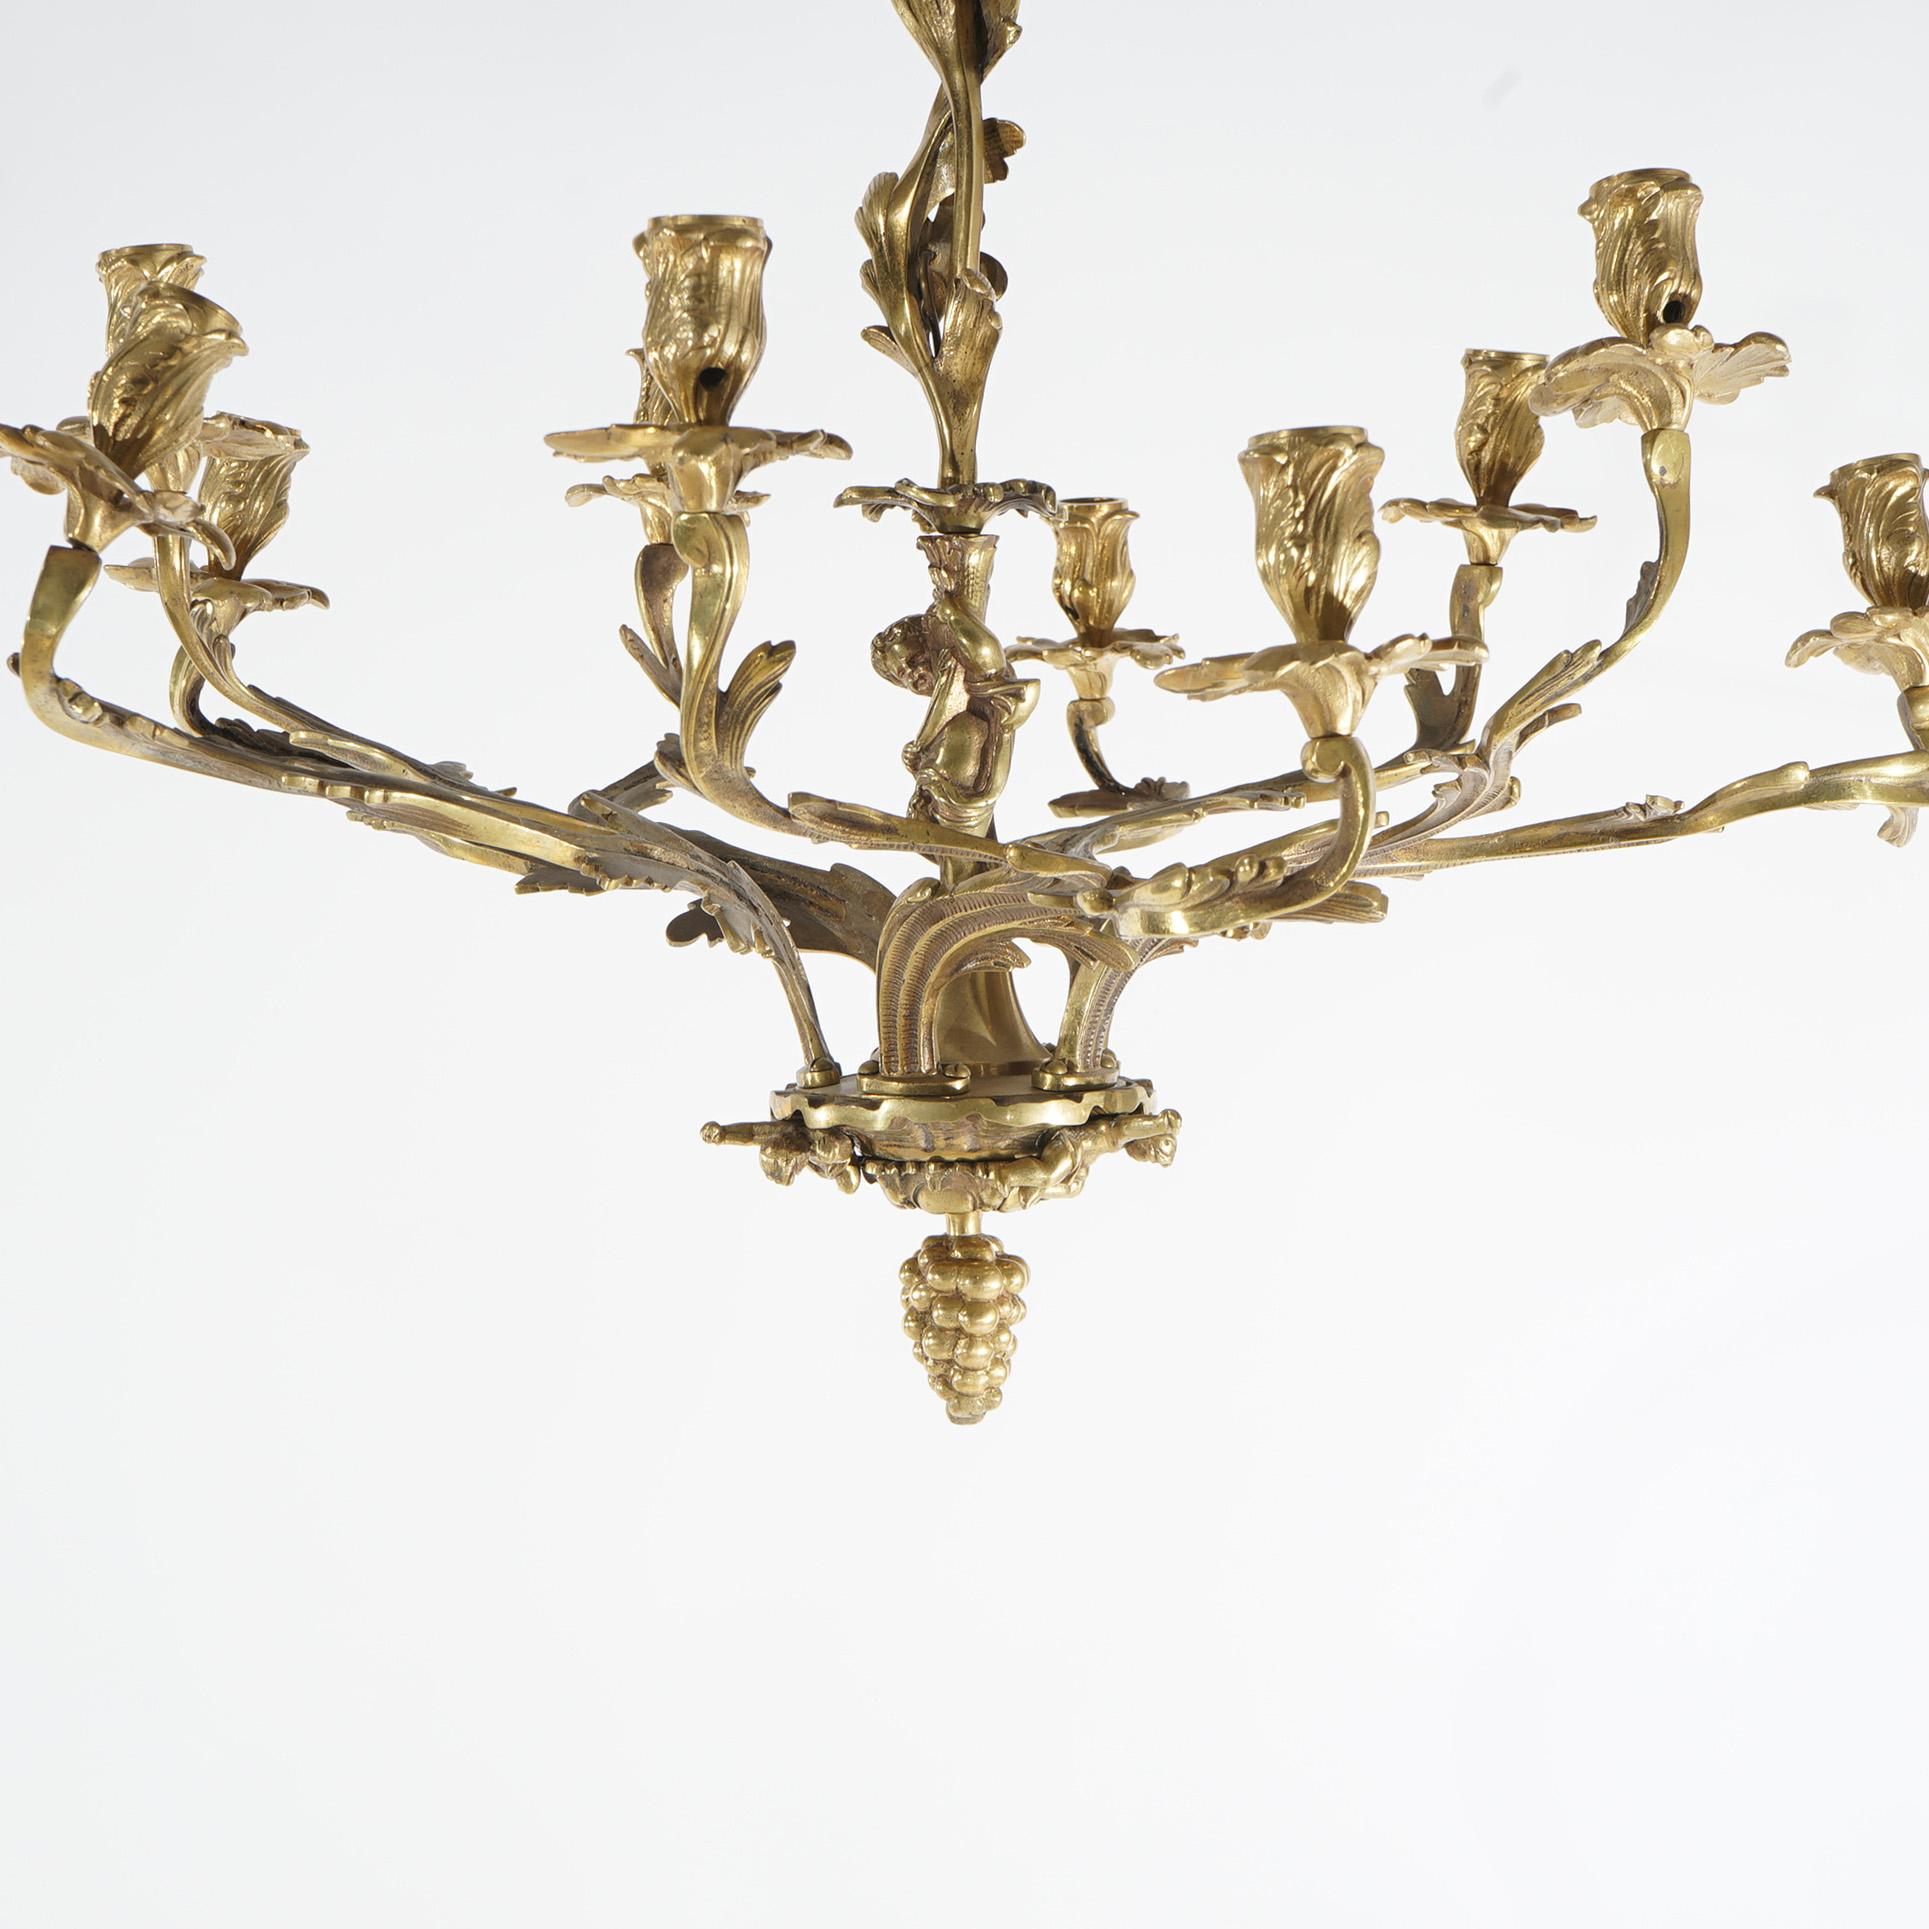 Antique French Louis XIV Gilt Bronze Figural Cherub Candelabra Chandelier c1880 In Good Condition For Sale In Big Flats, NY